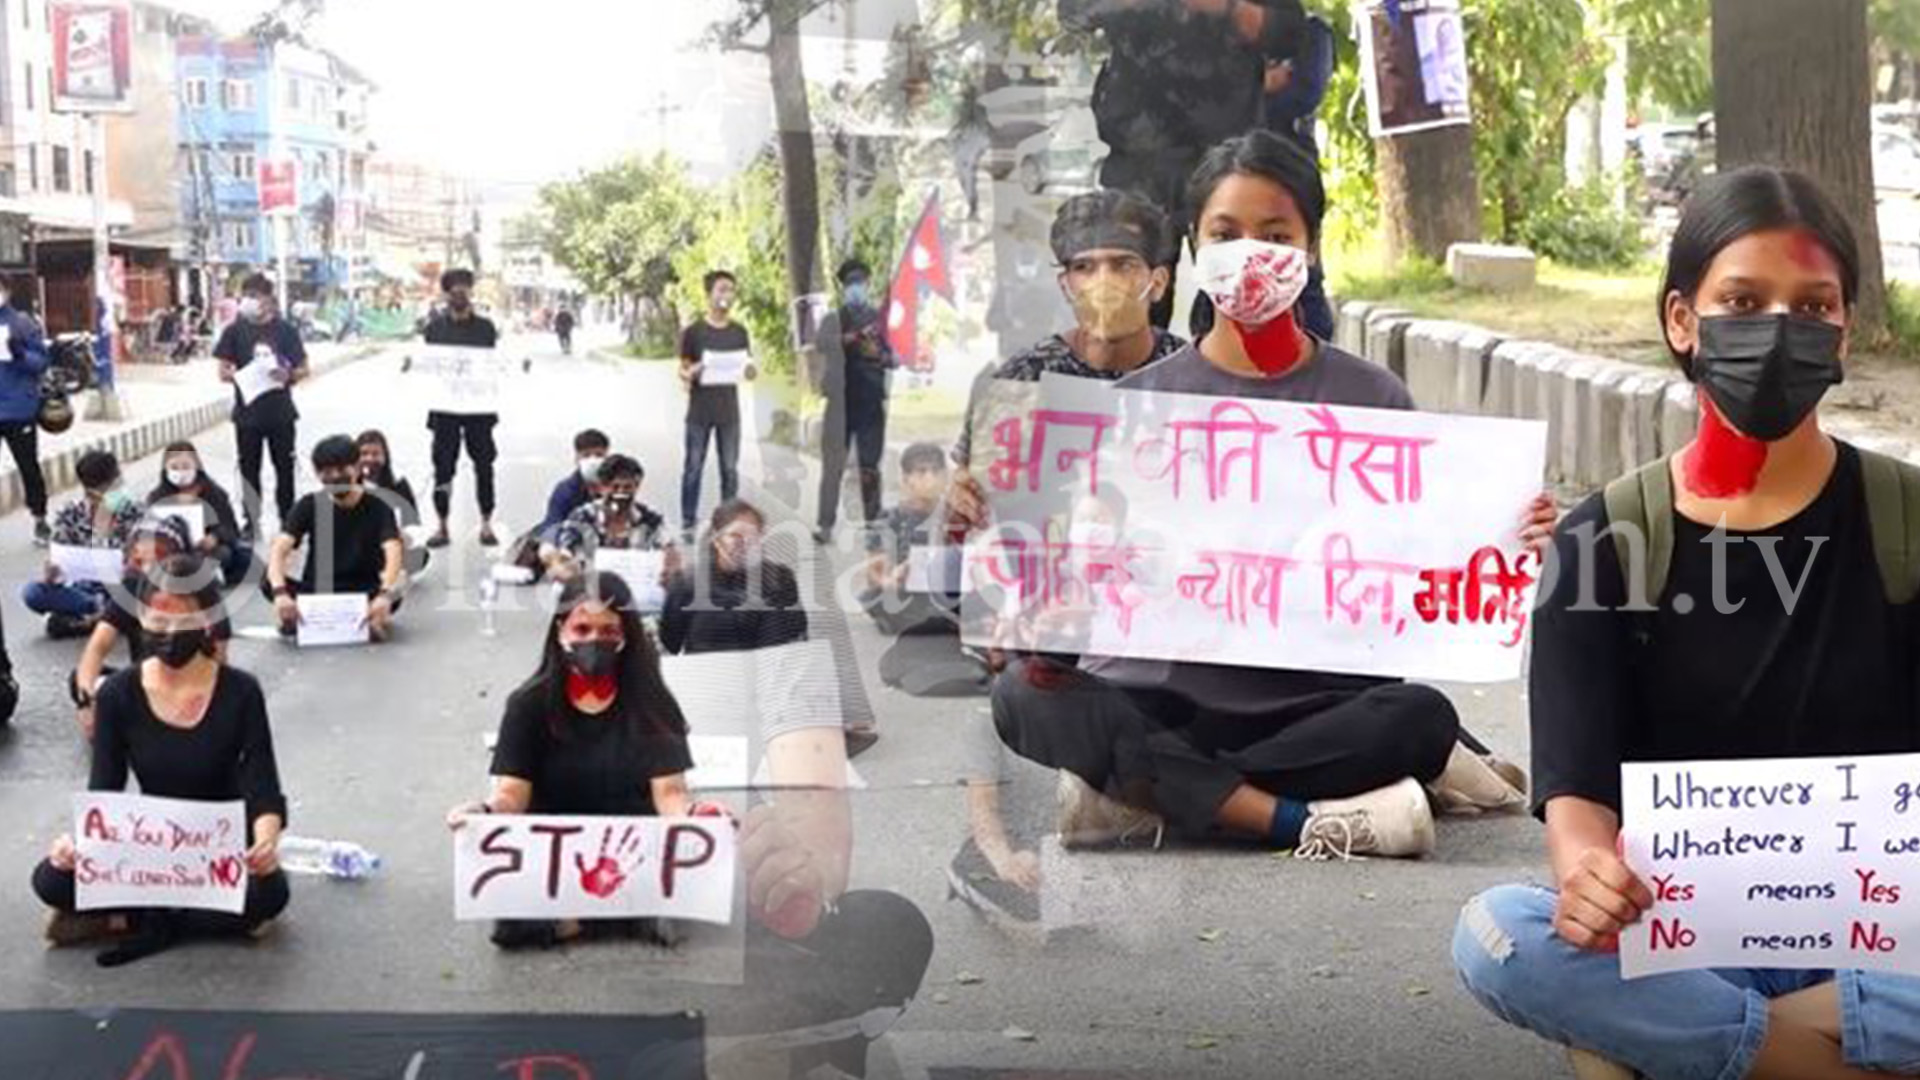 Nepal Jesis group staged a demonstration